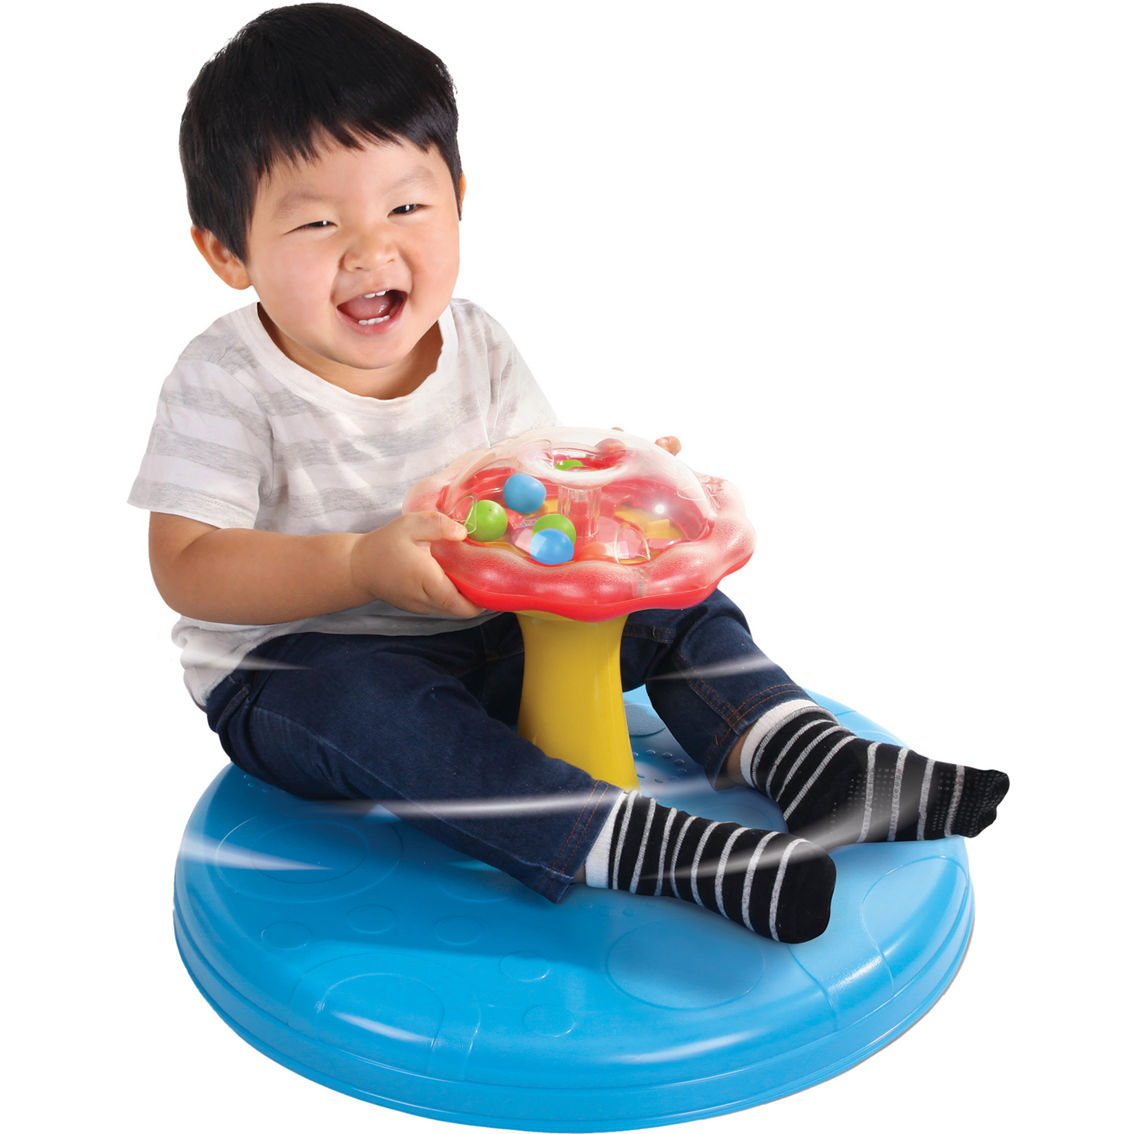 Twirl 'N Whirl Go-Round Activity Toy for Toddlers - Image 3 of 5